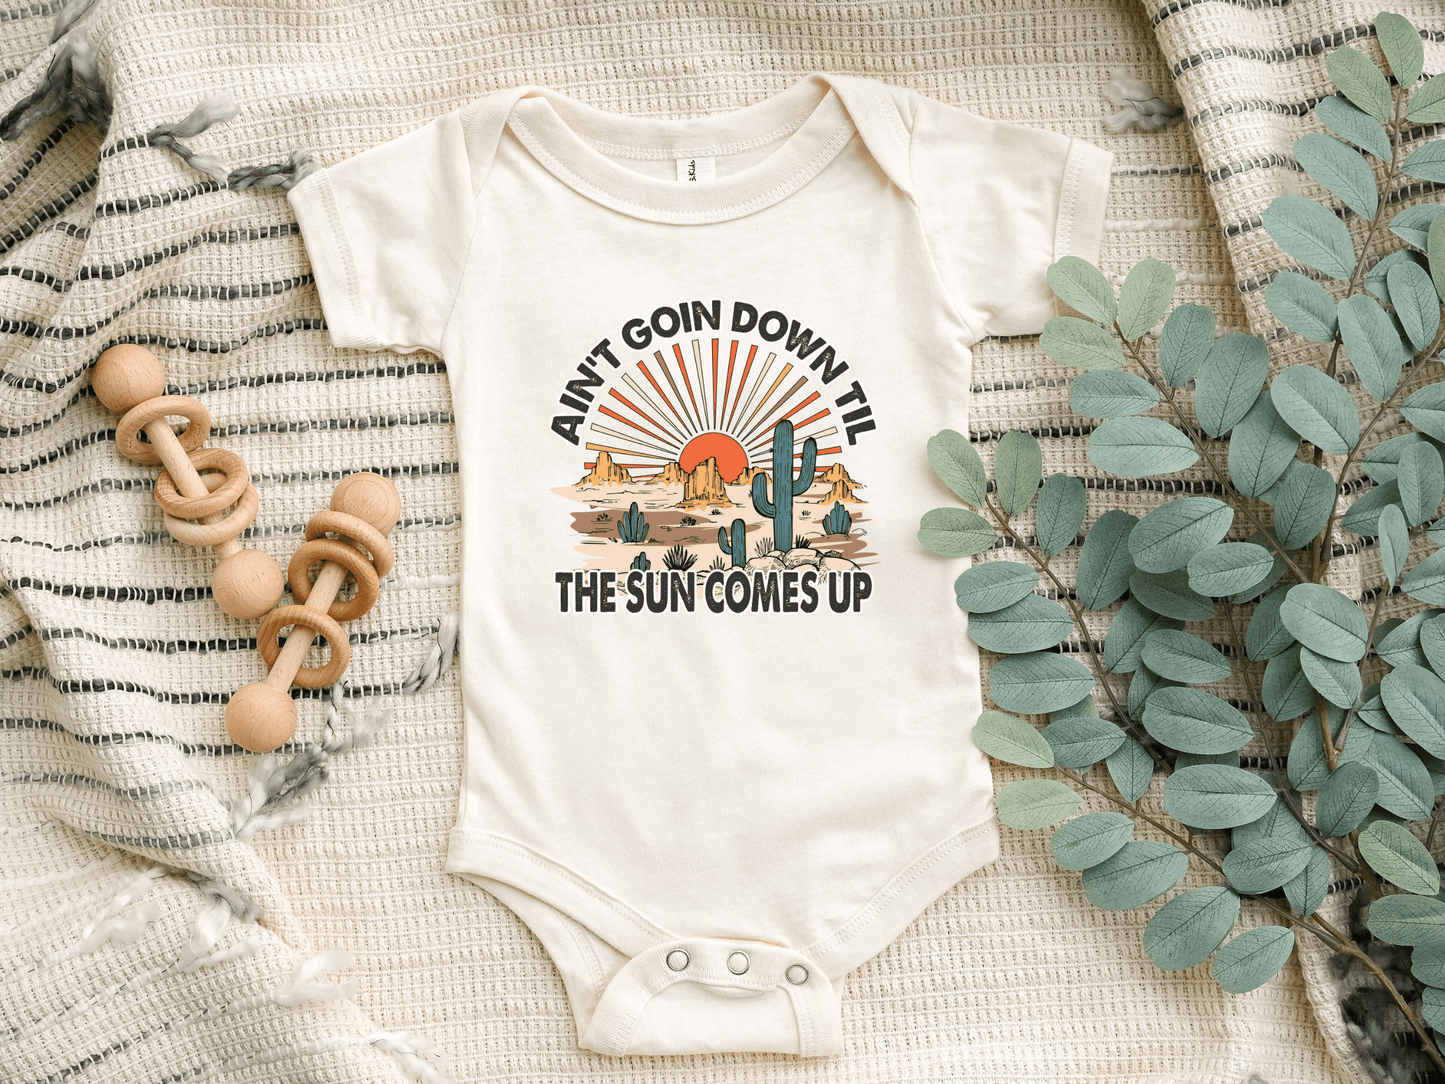 Ain't Goin Down Till the Sun Comes Up Baby Bodysuit